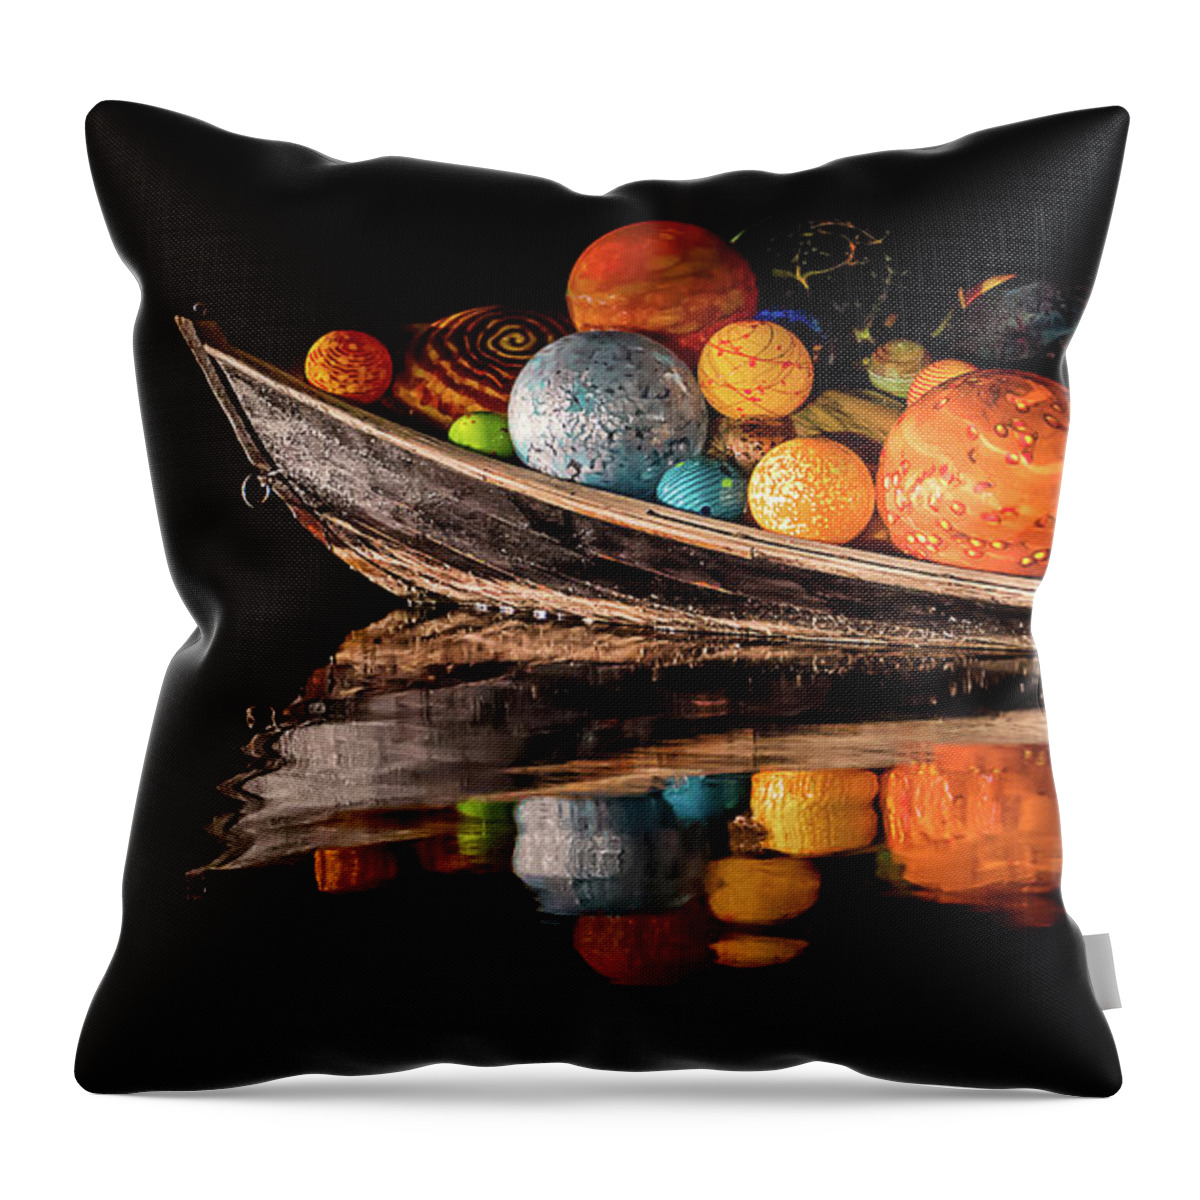 Boat Ride Throw Pillow featuring the photograph The Boat Ride by Sylvia Goldkranz